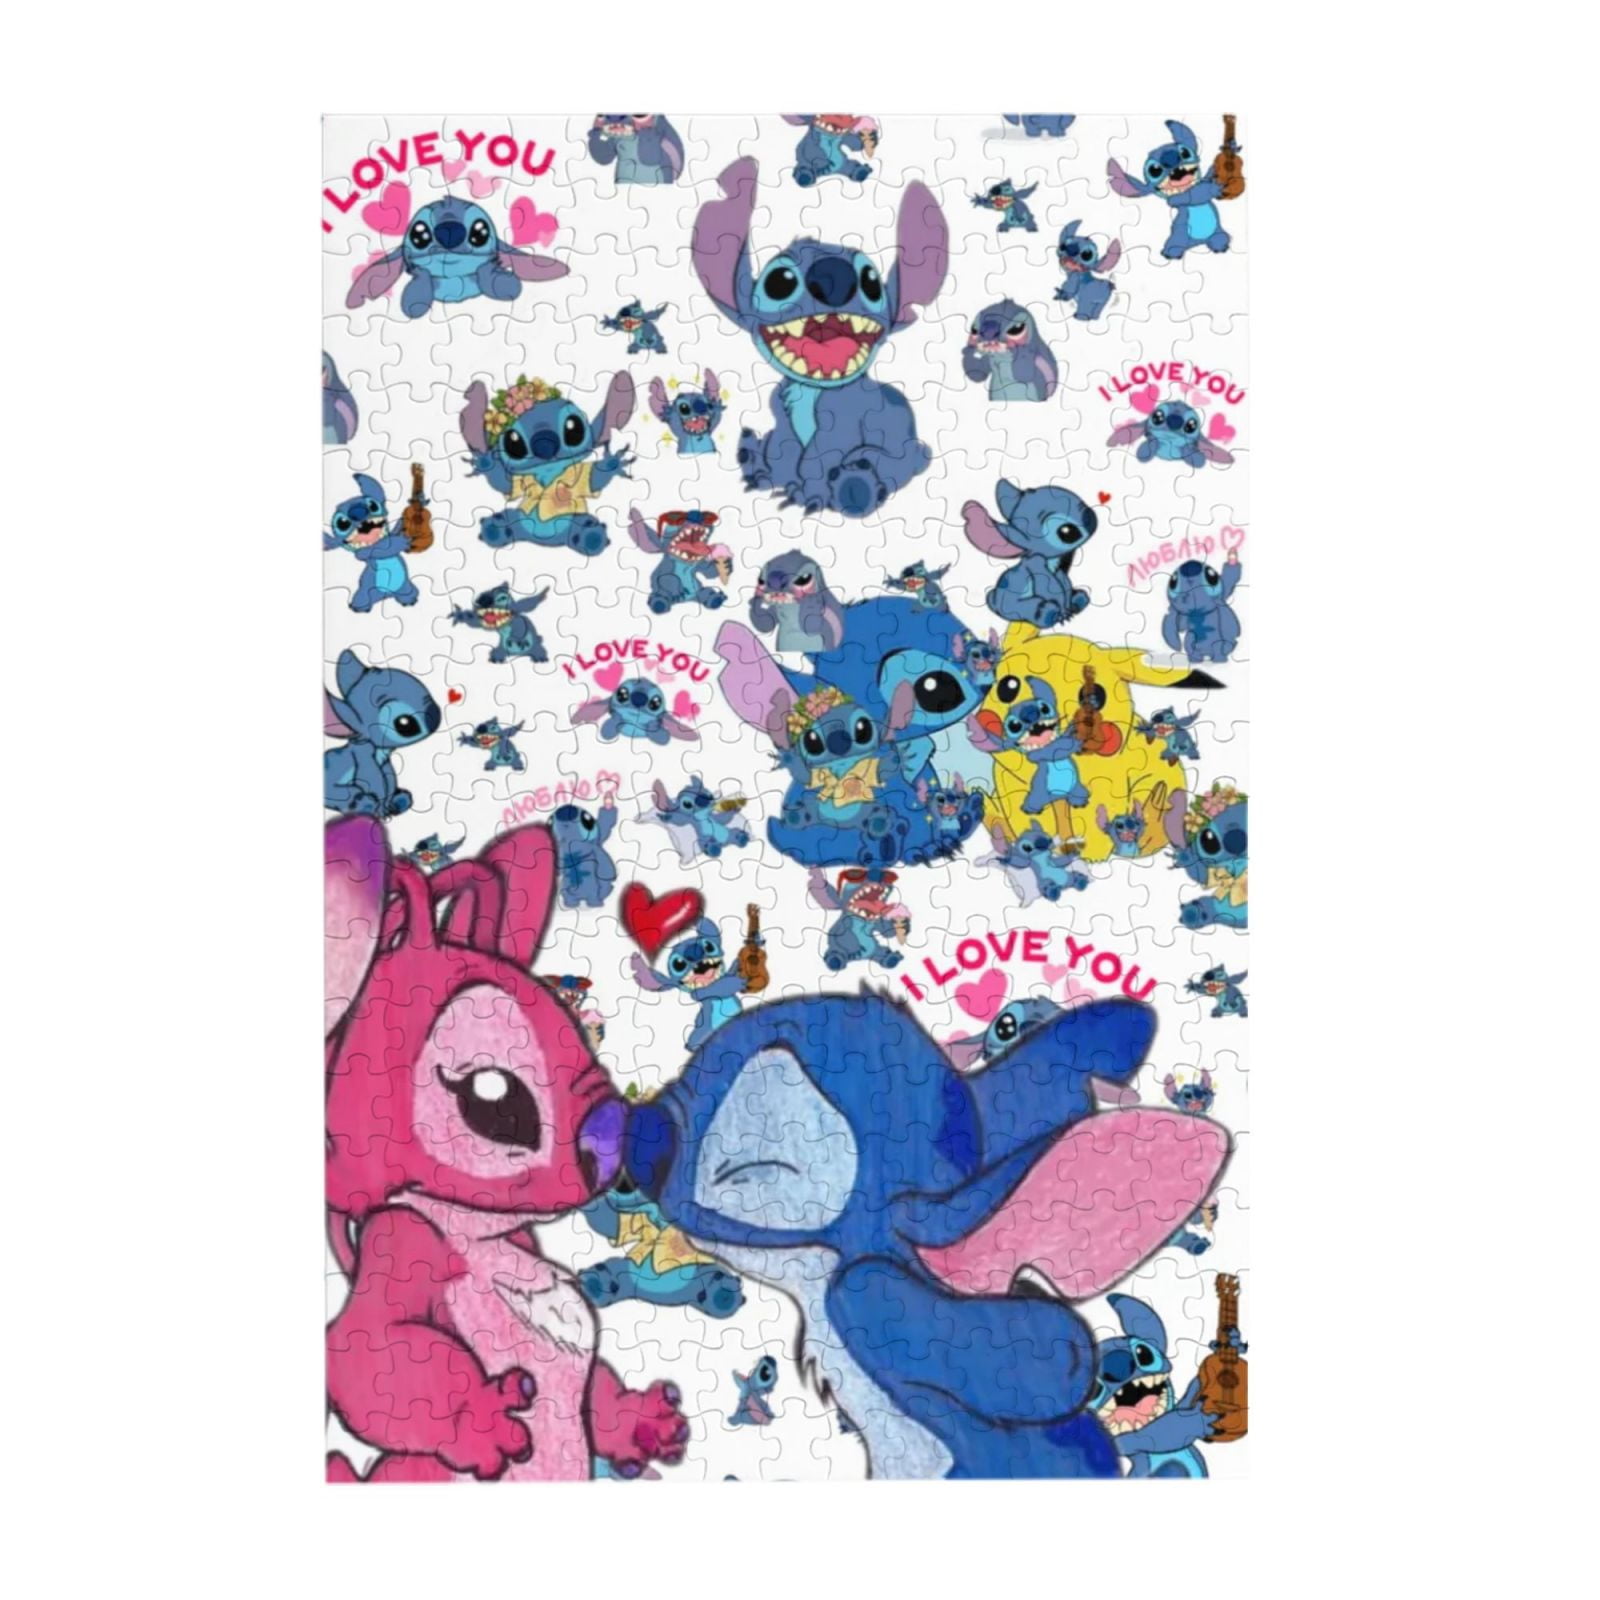 300 Piece Jigsaw Puzzle For Adults & Kids - Cute Stitch Puzzle For